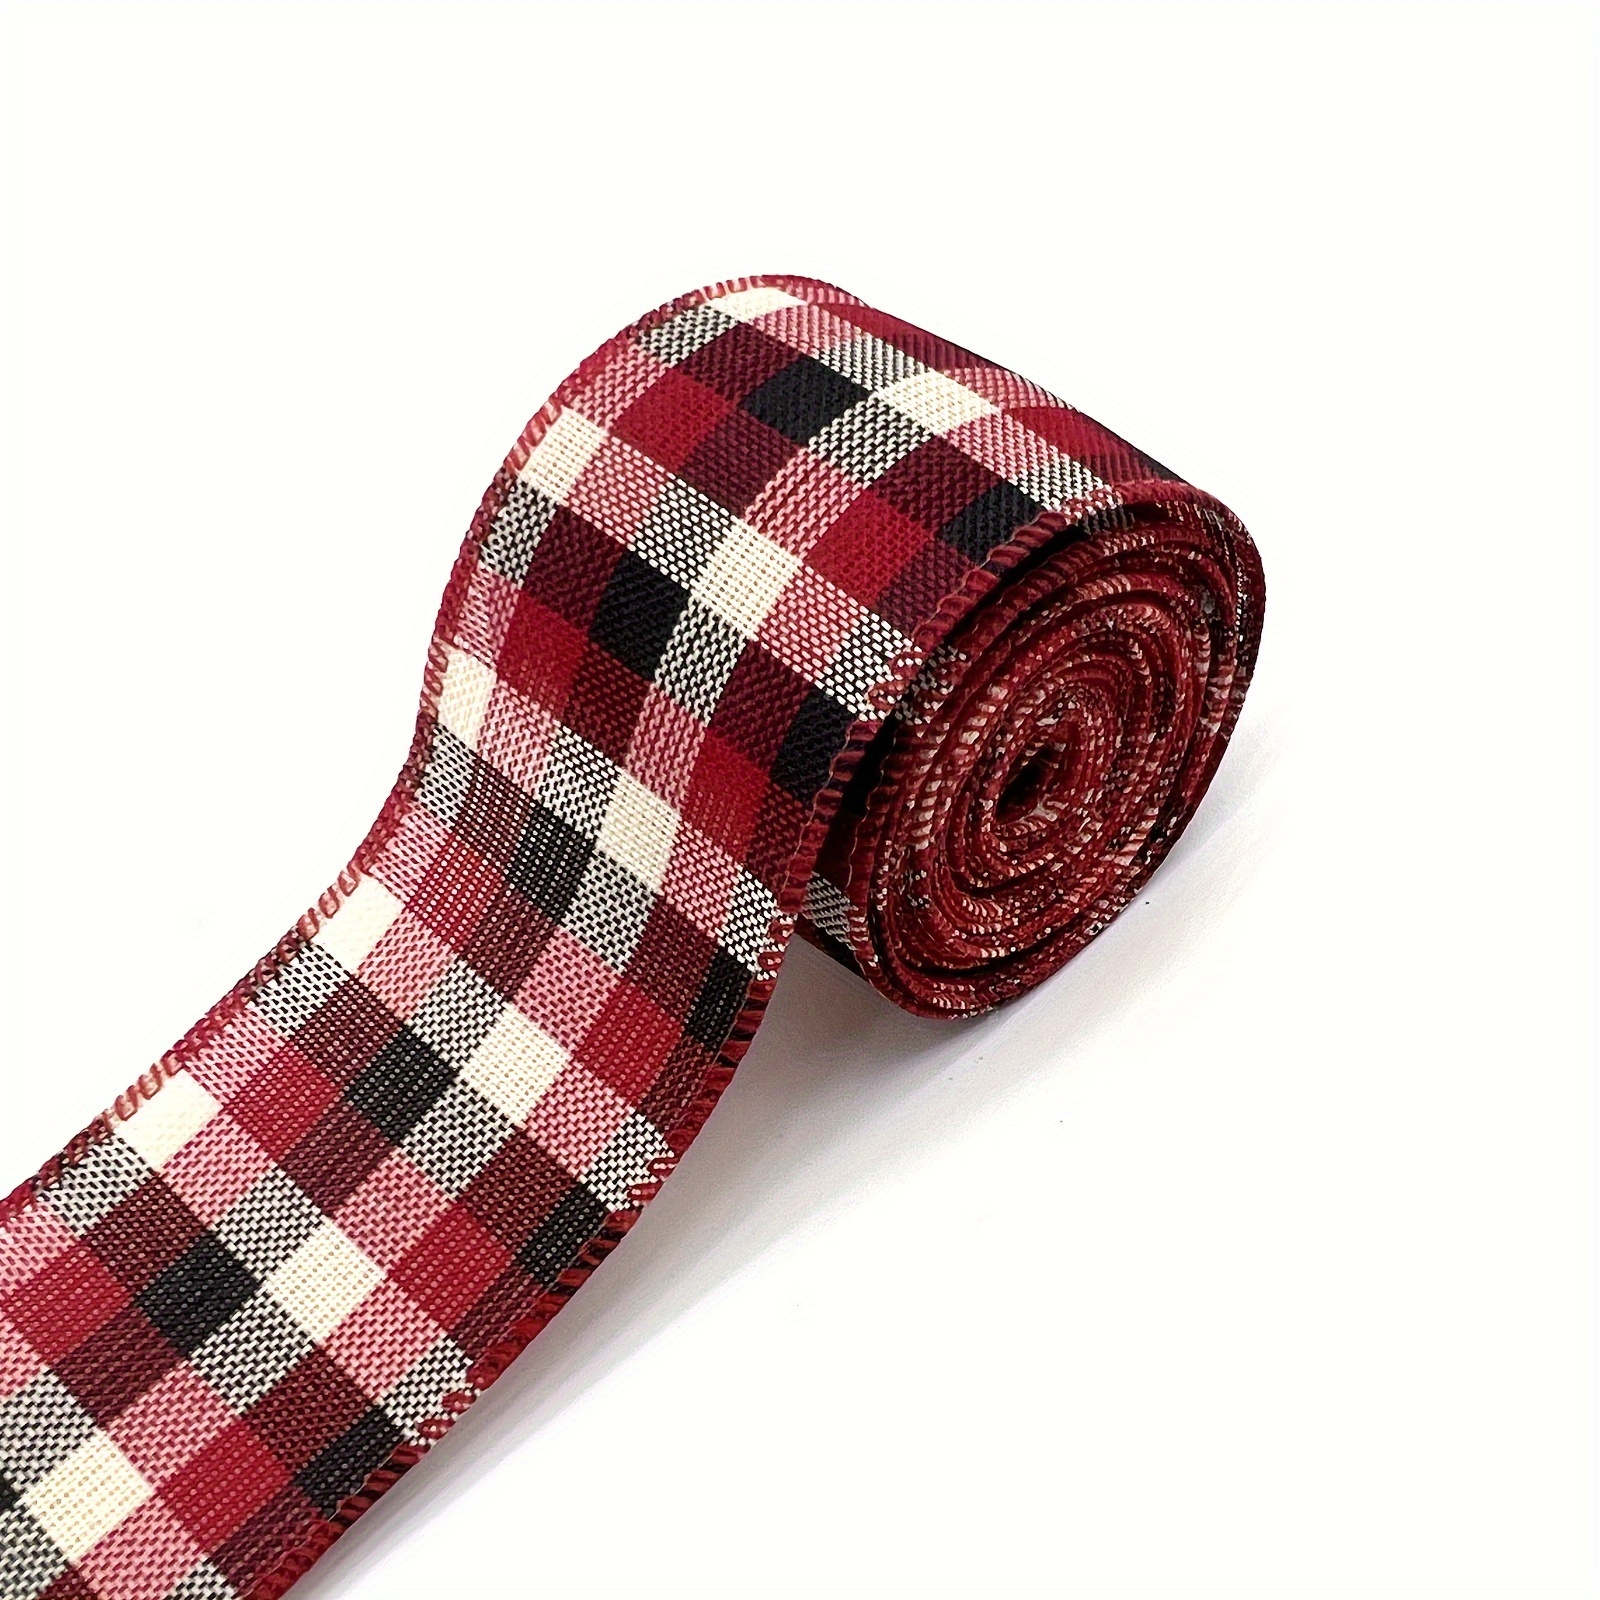 Wired Red Gingham Ribbon, Red White Gingham Check Ribbon for